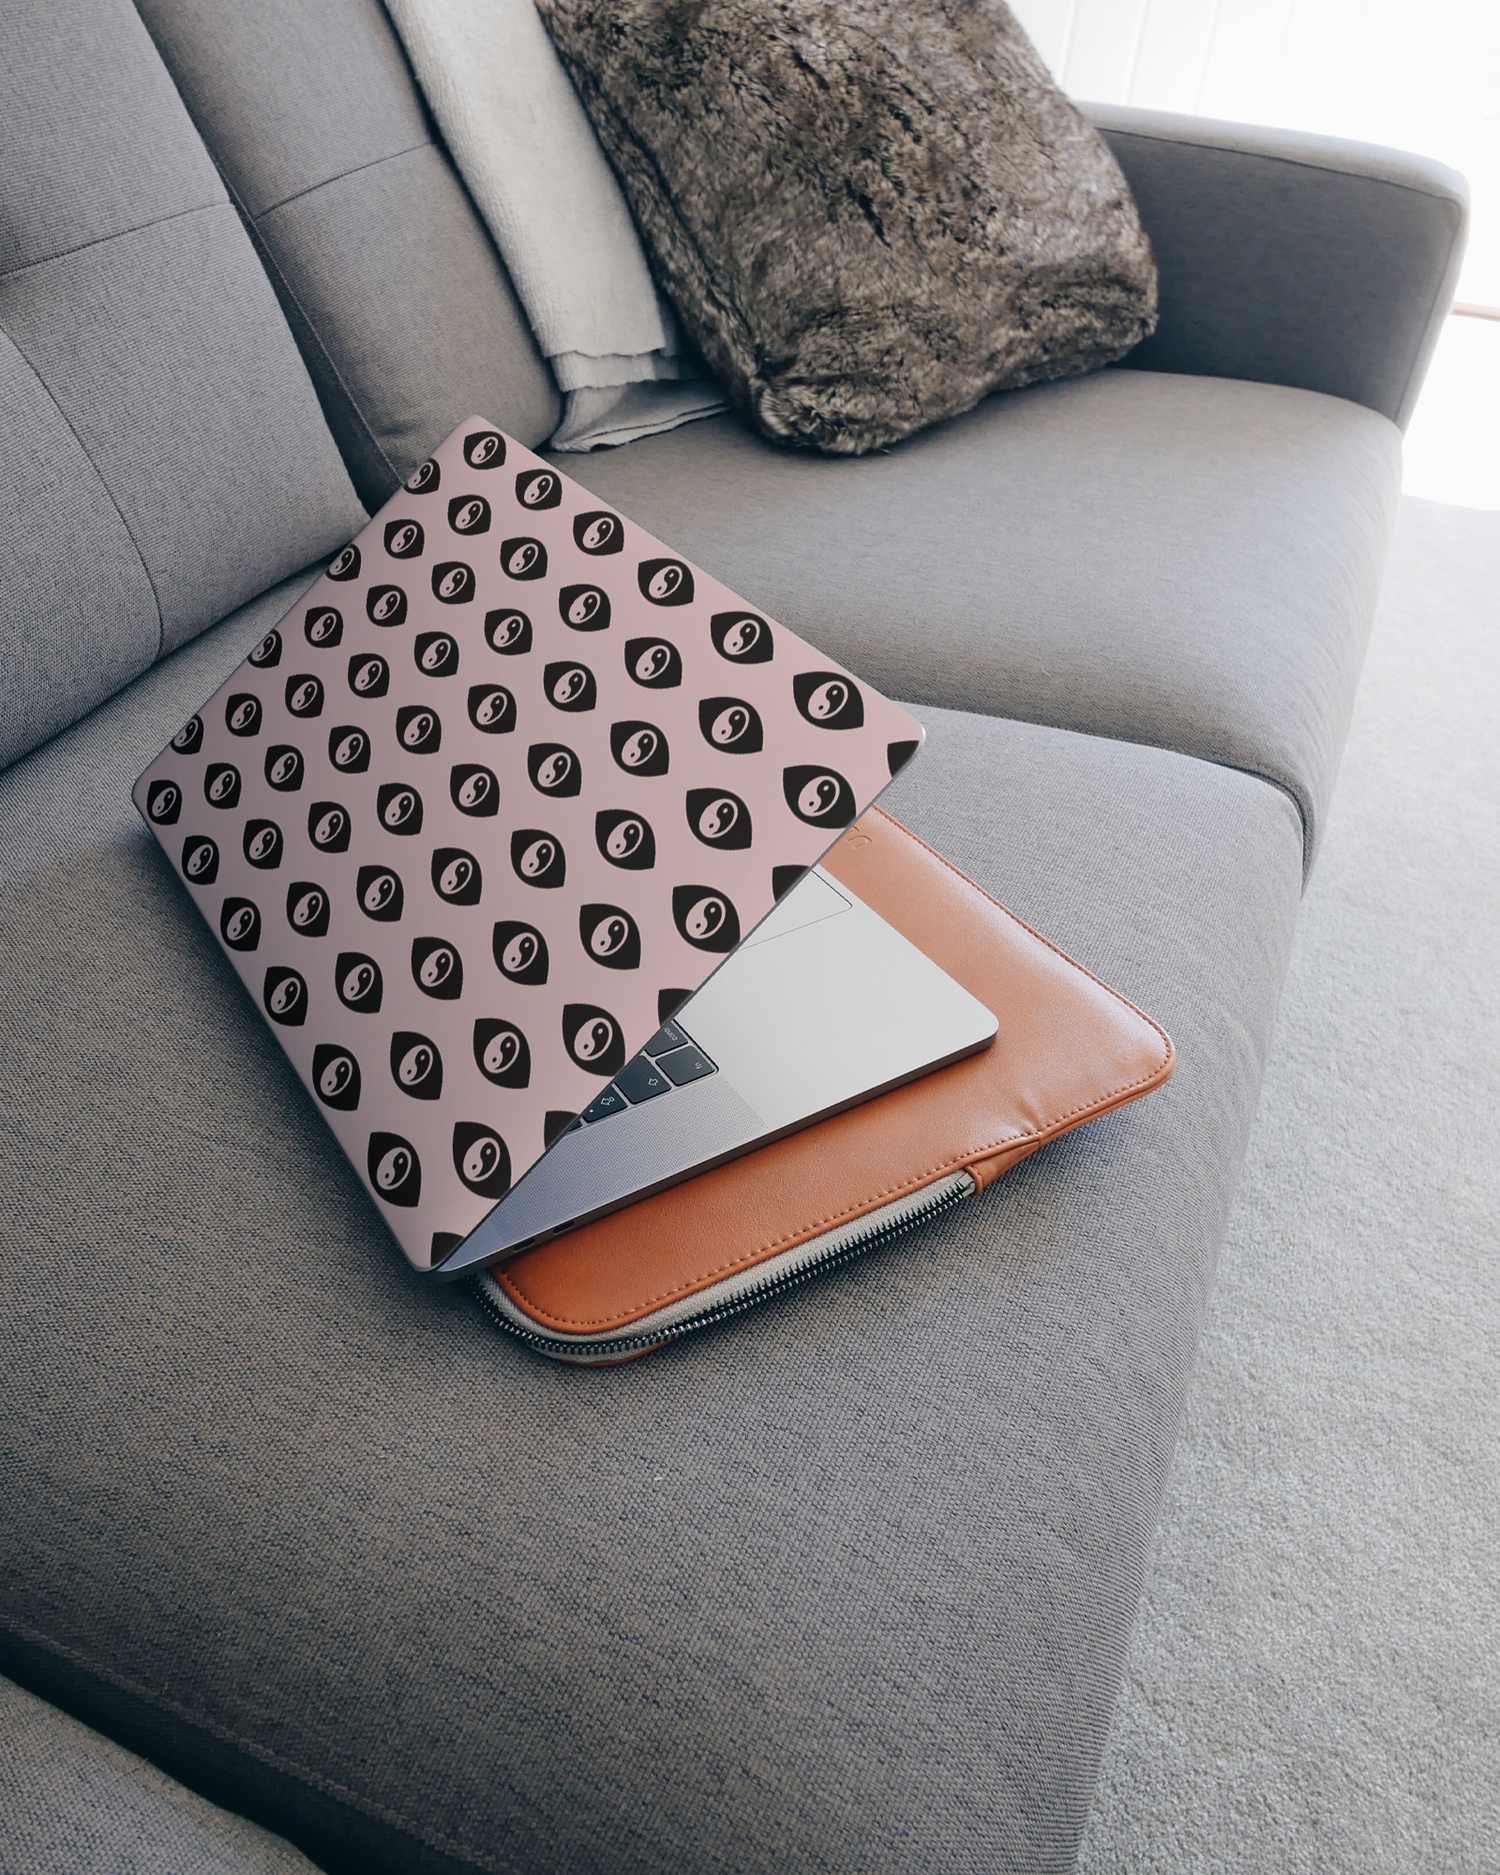 Yin Yang Repeat Laptop Skin for 15 inch Apple MacBooks on a couch